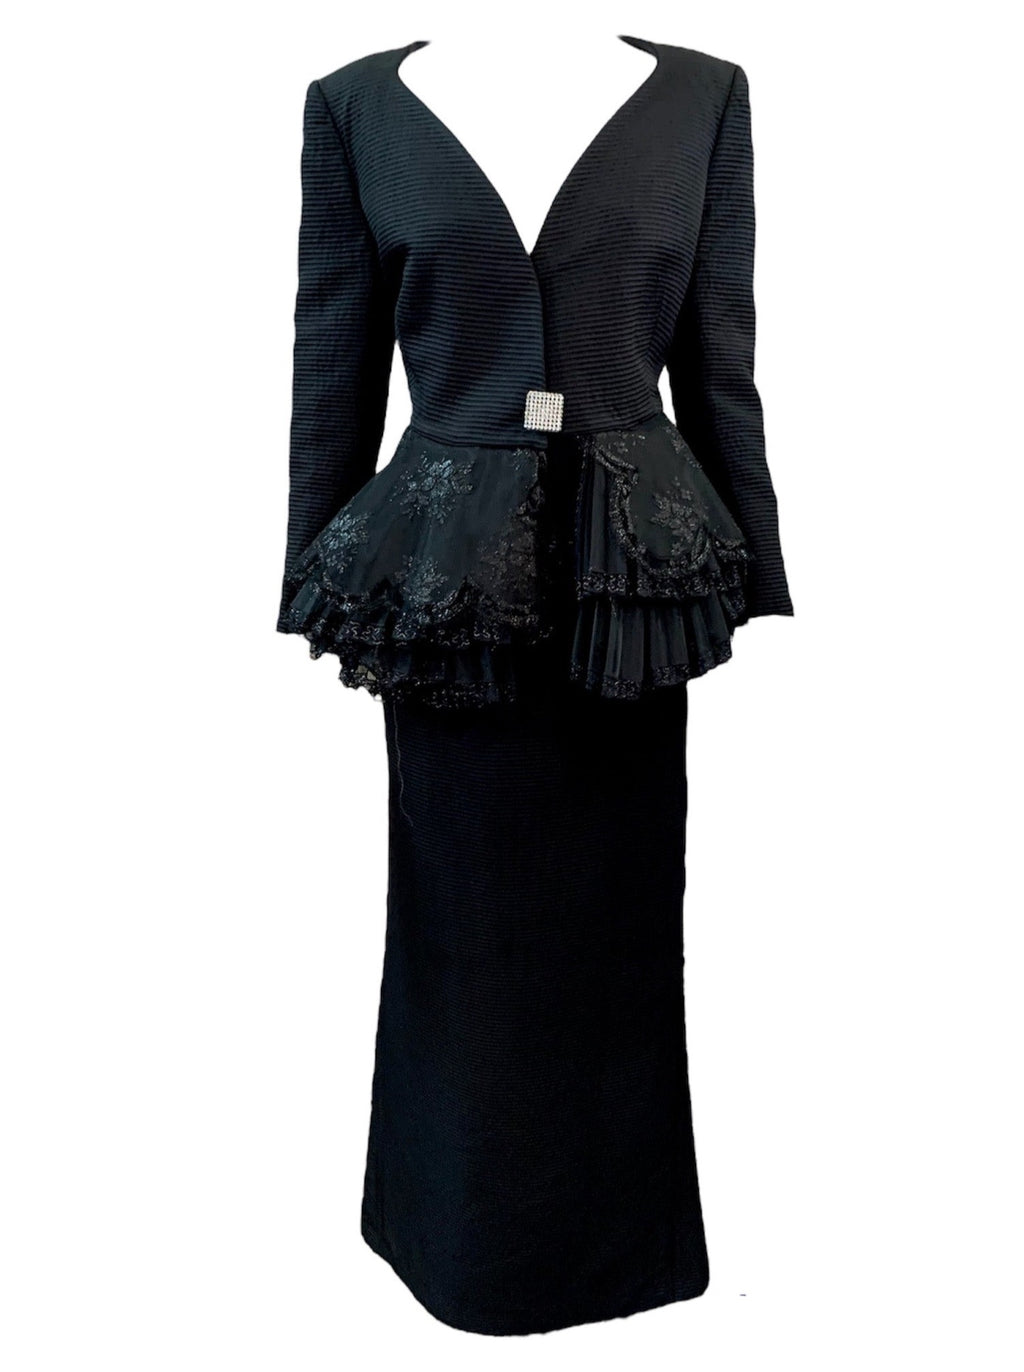 Gianfranco  Ferre 80s Black Evening Ensemble with Lace Peplum FRONT 1 of 8